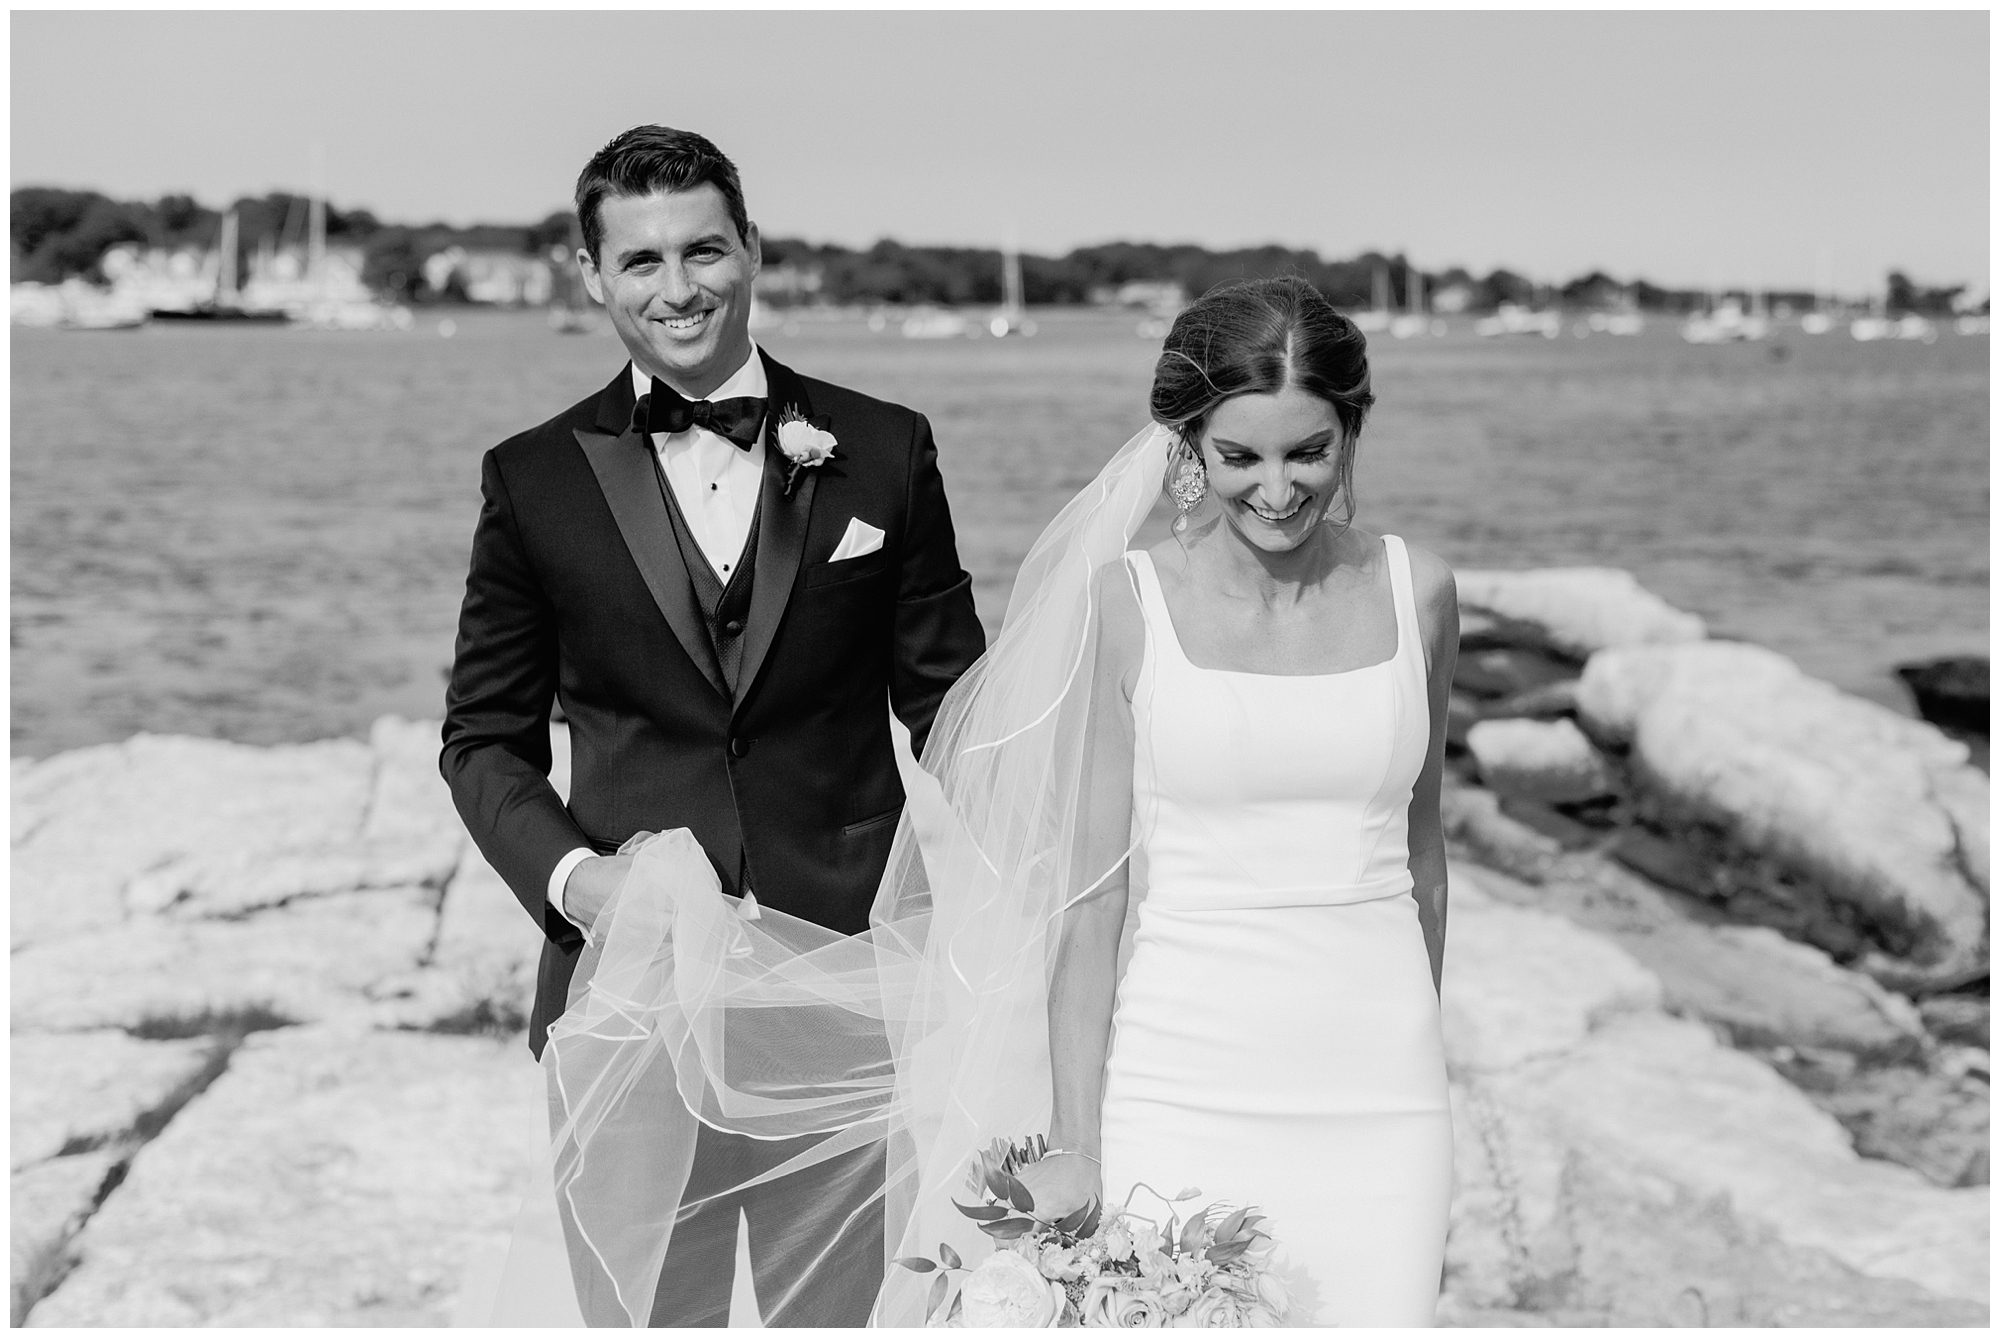 Michelle & Andrew's Wentworth Country Club Wedding in Rye, NH